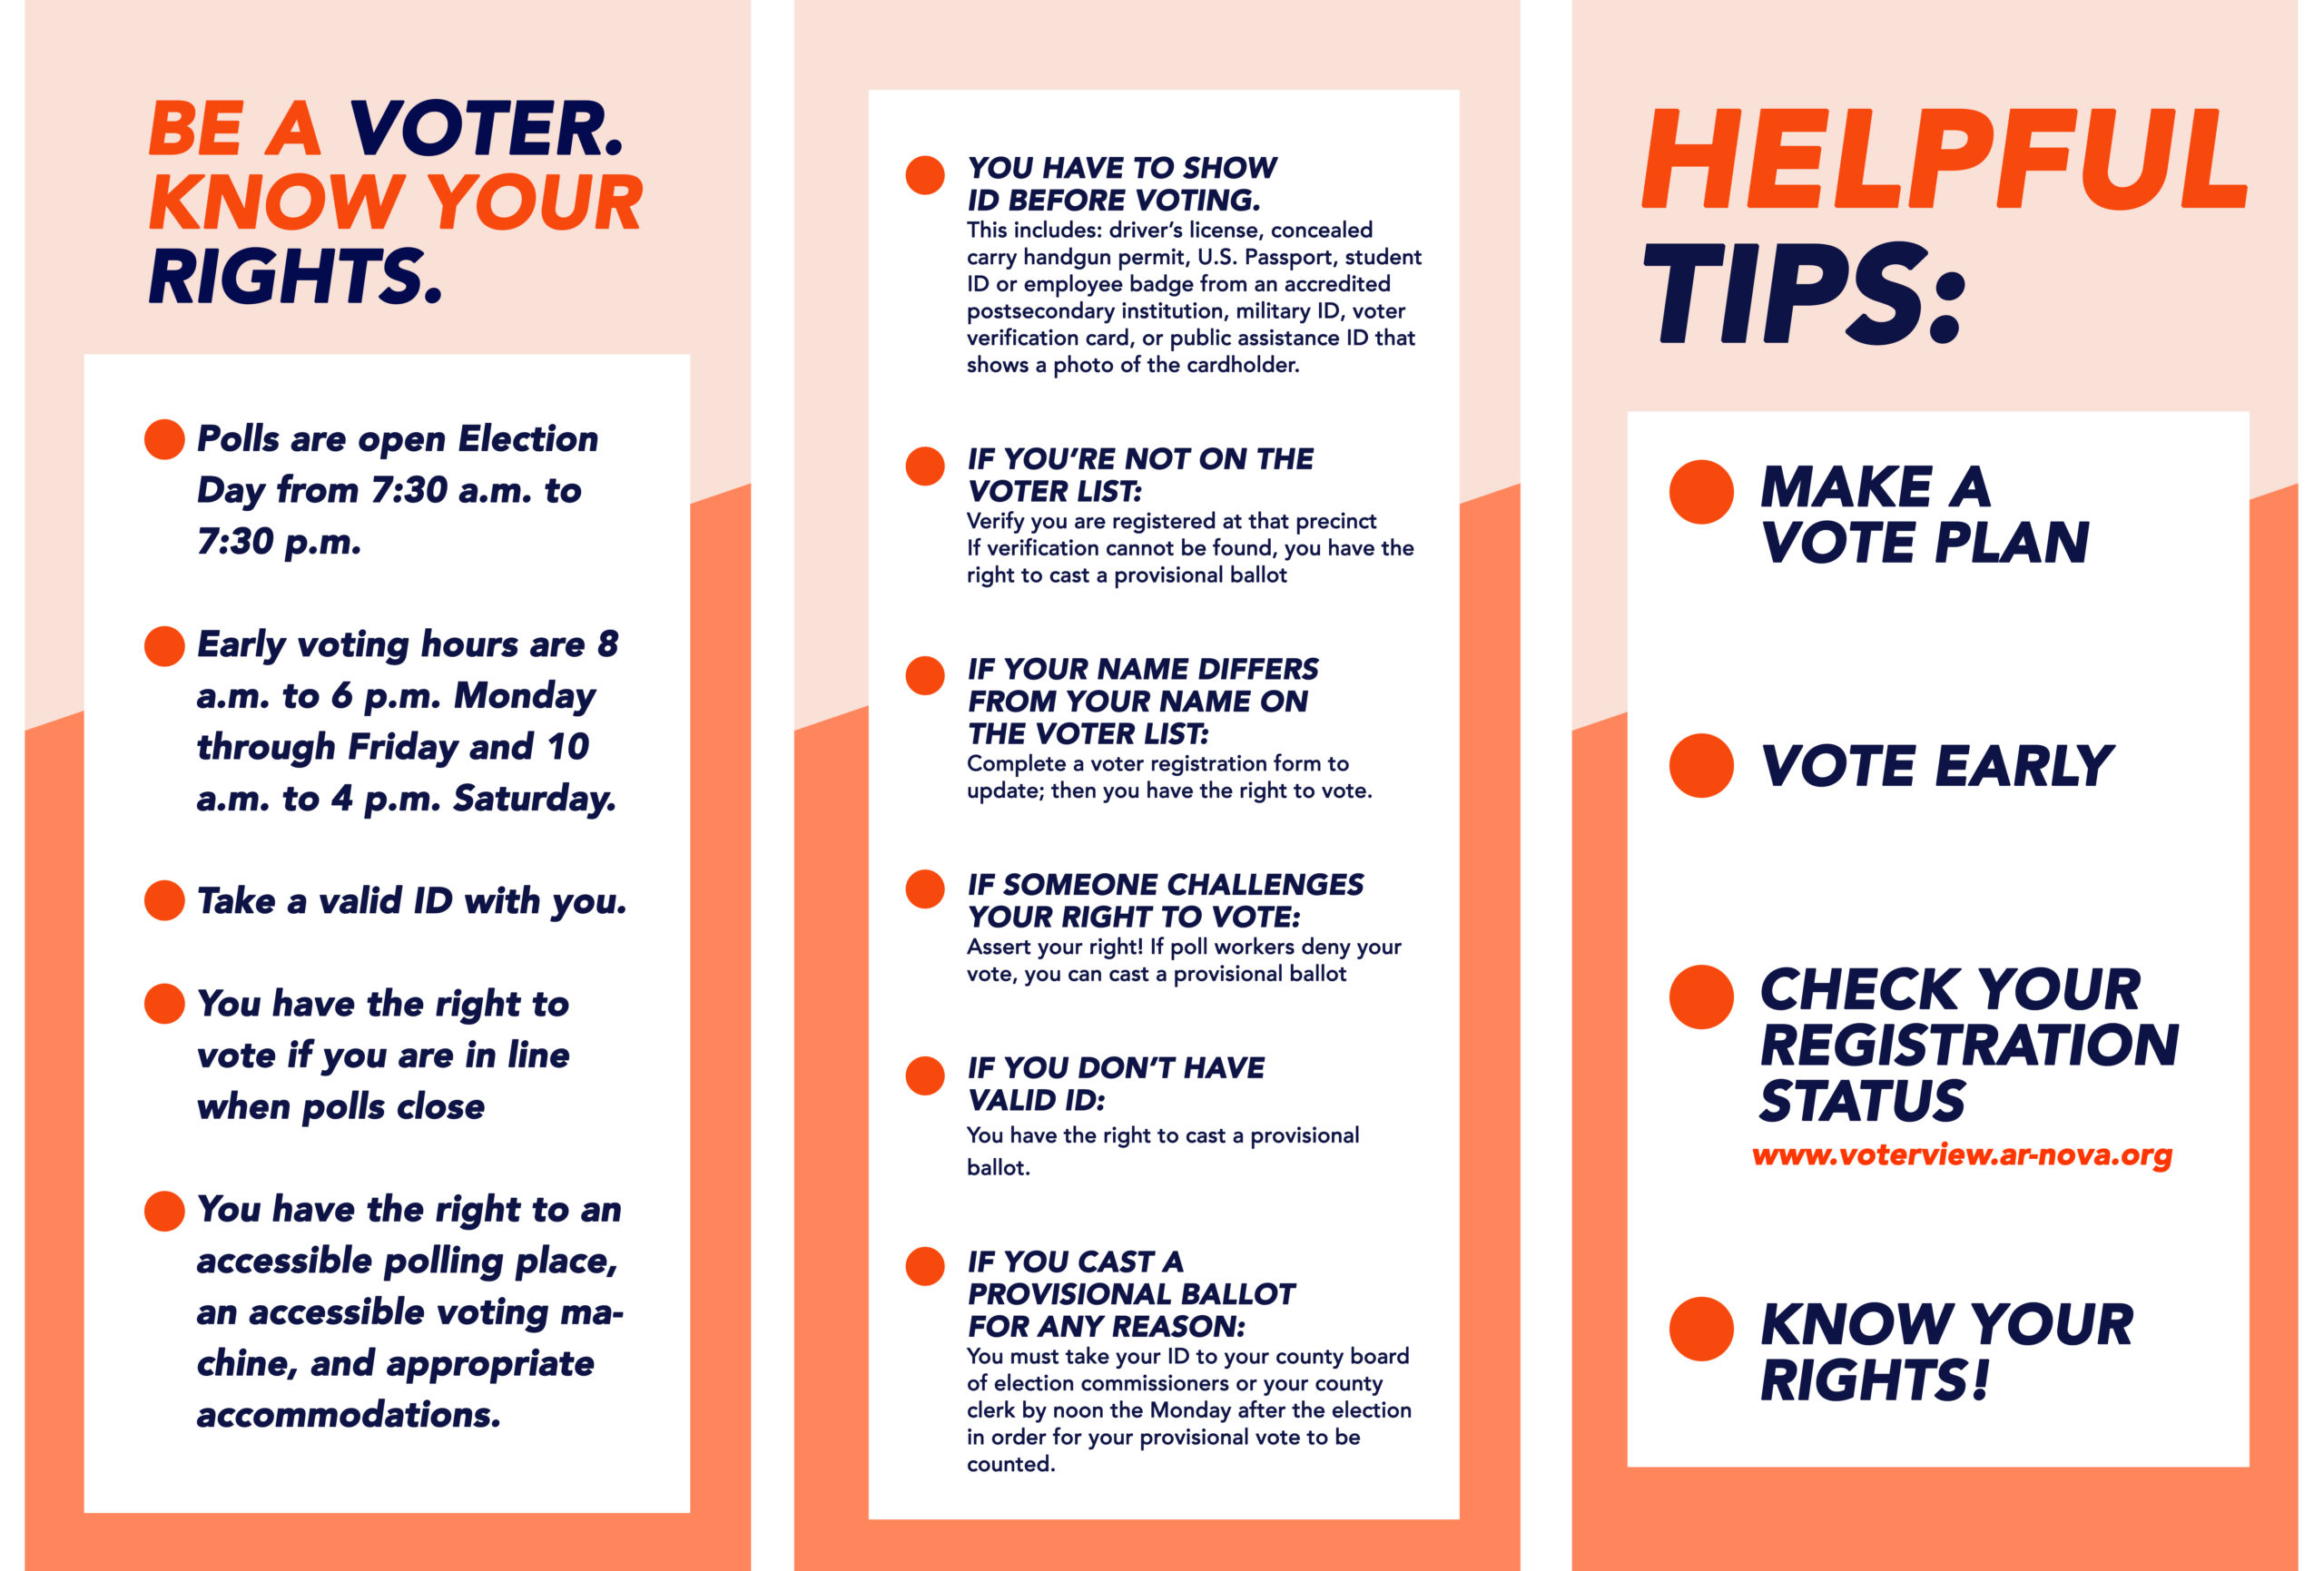 Be a Voter. Know Your Rights.